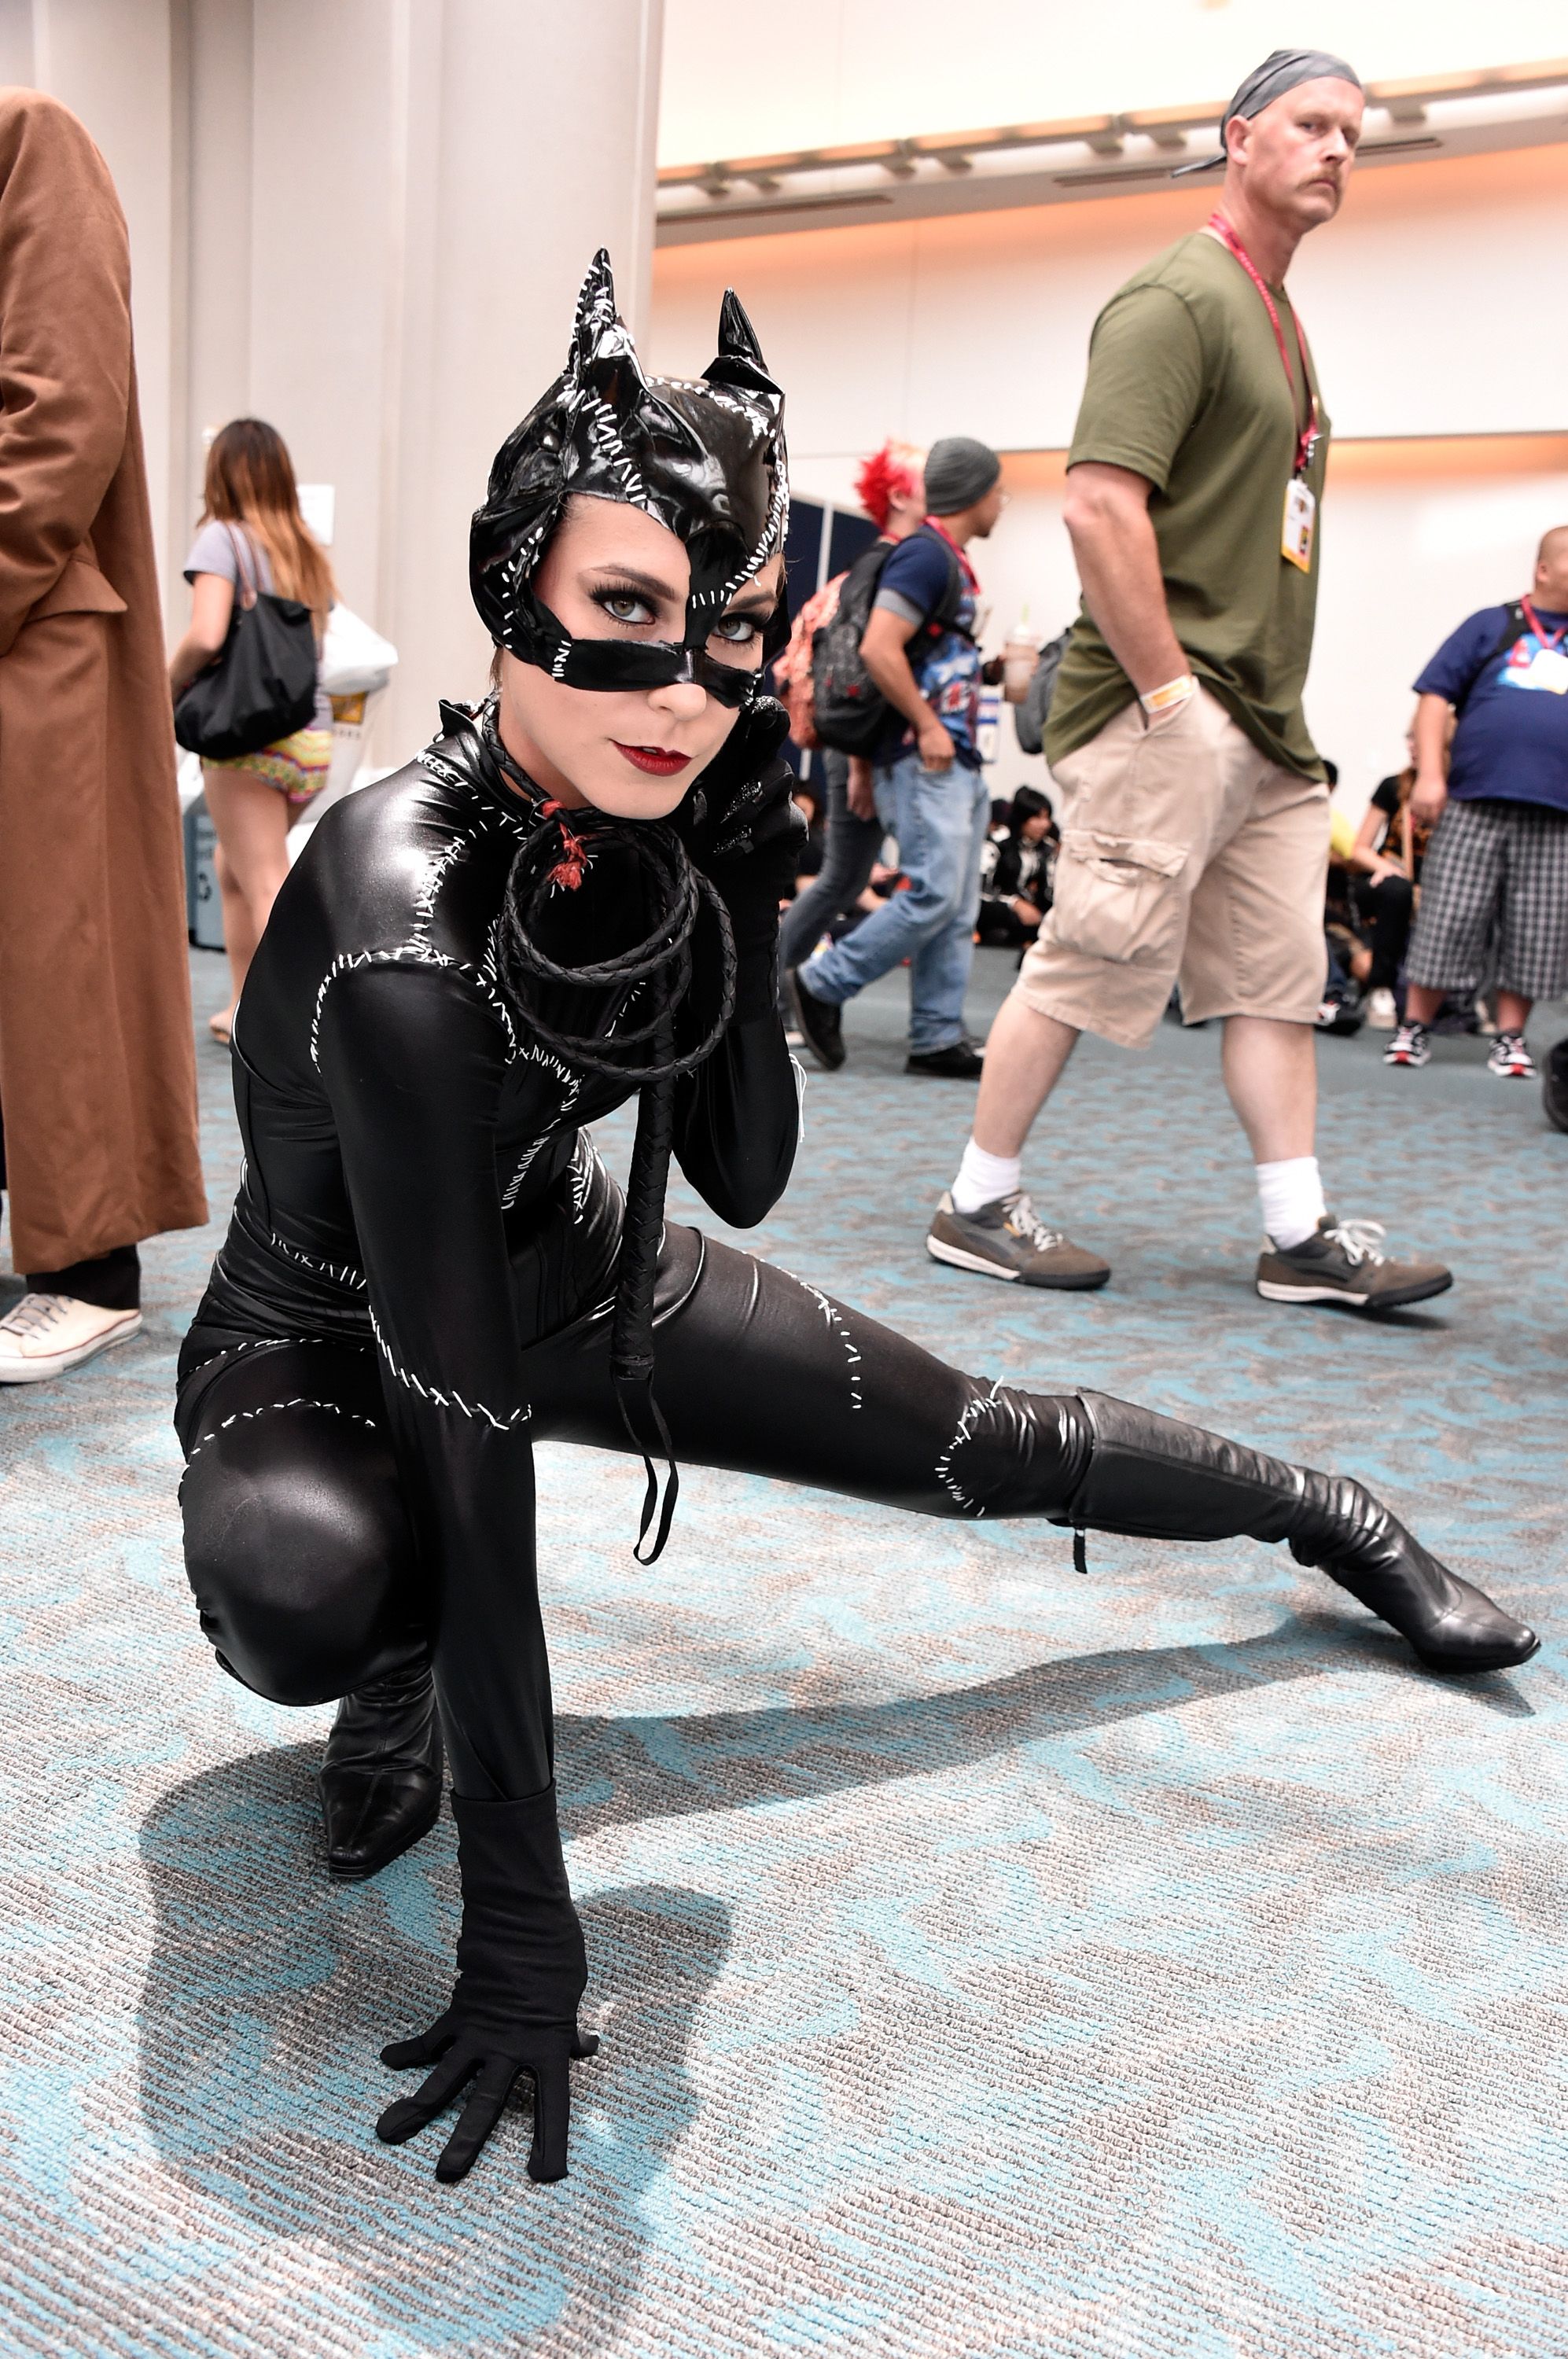 The Most Incredible Cosplay Costumes to Copy | Cosplay, Videogames ...